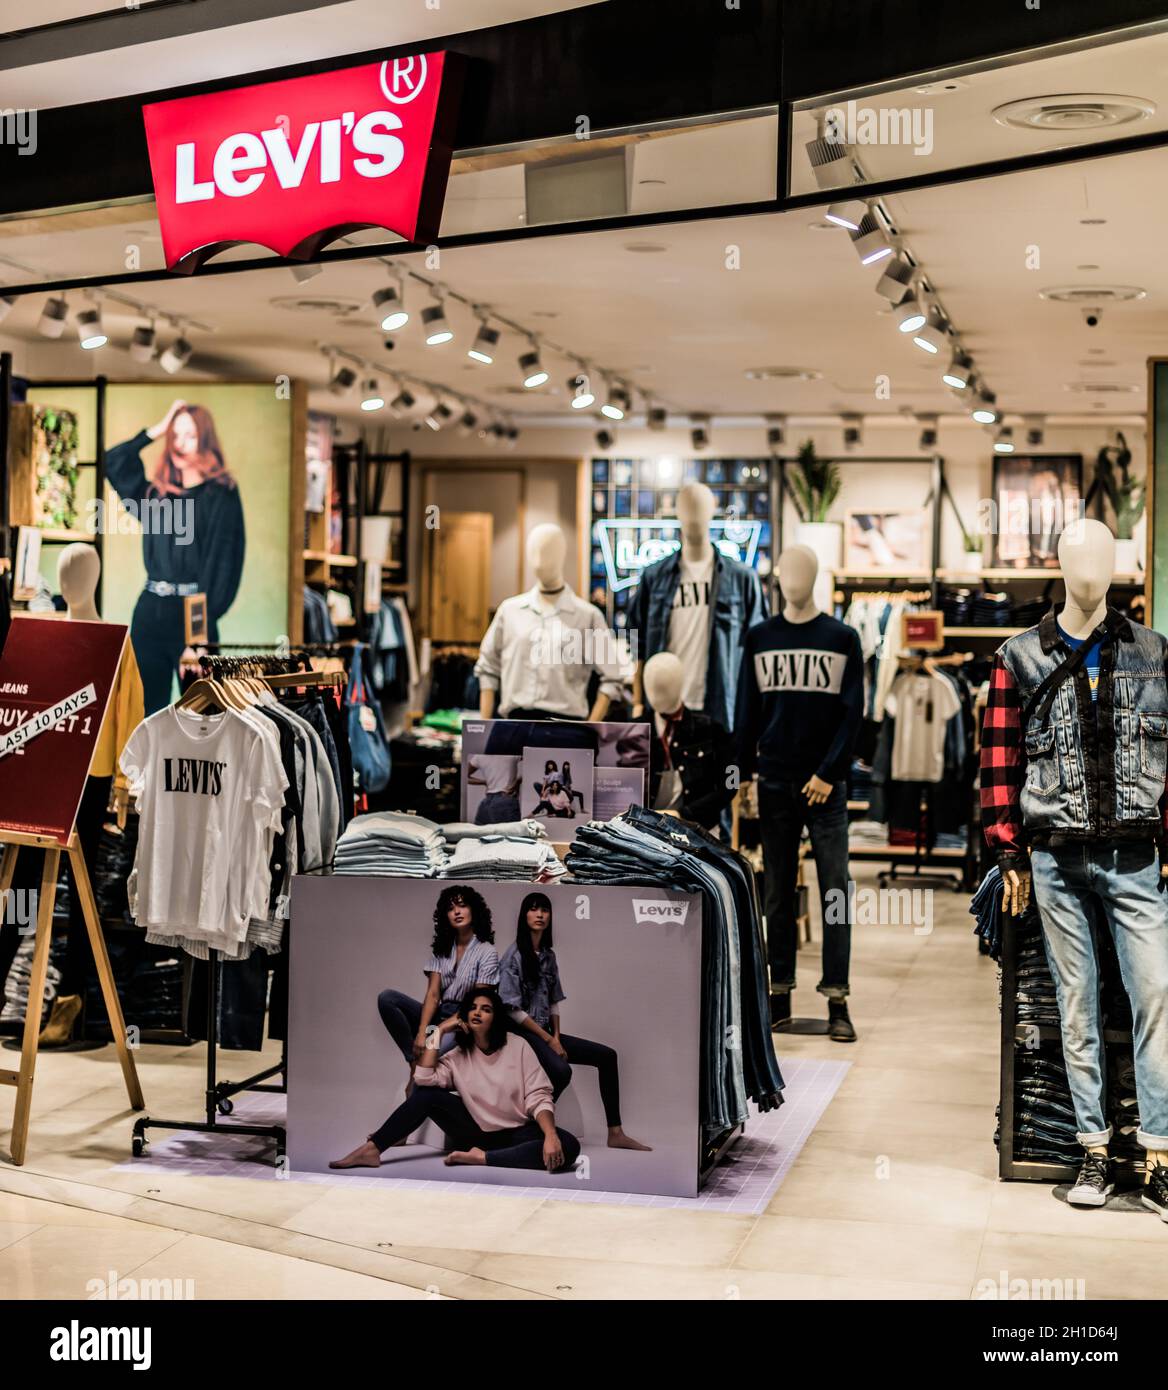 Pew Lively Learning SINGAPORE - MAR 5, 2020: Front entrance to Levis store in Singapore  shopping mall Stock Photo - Alamy